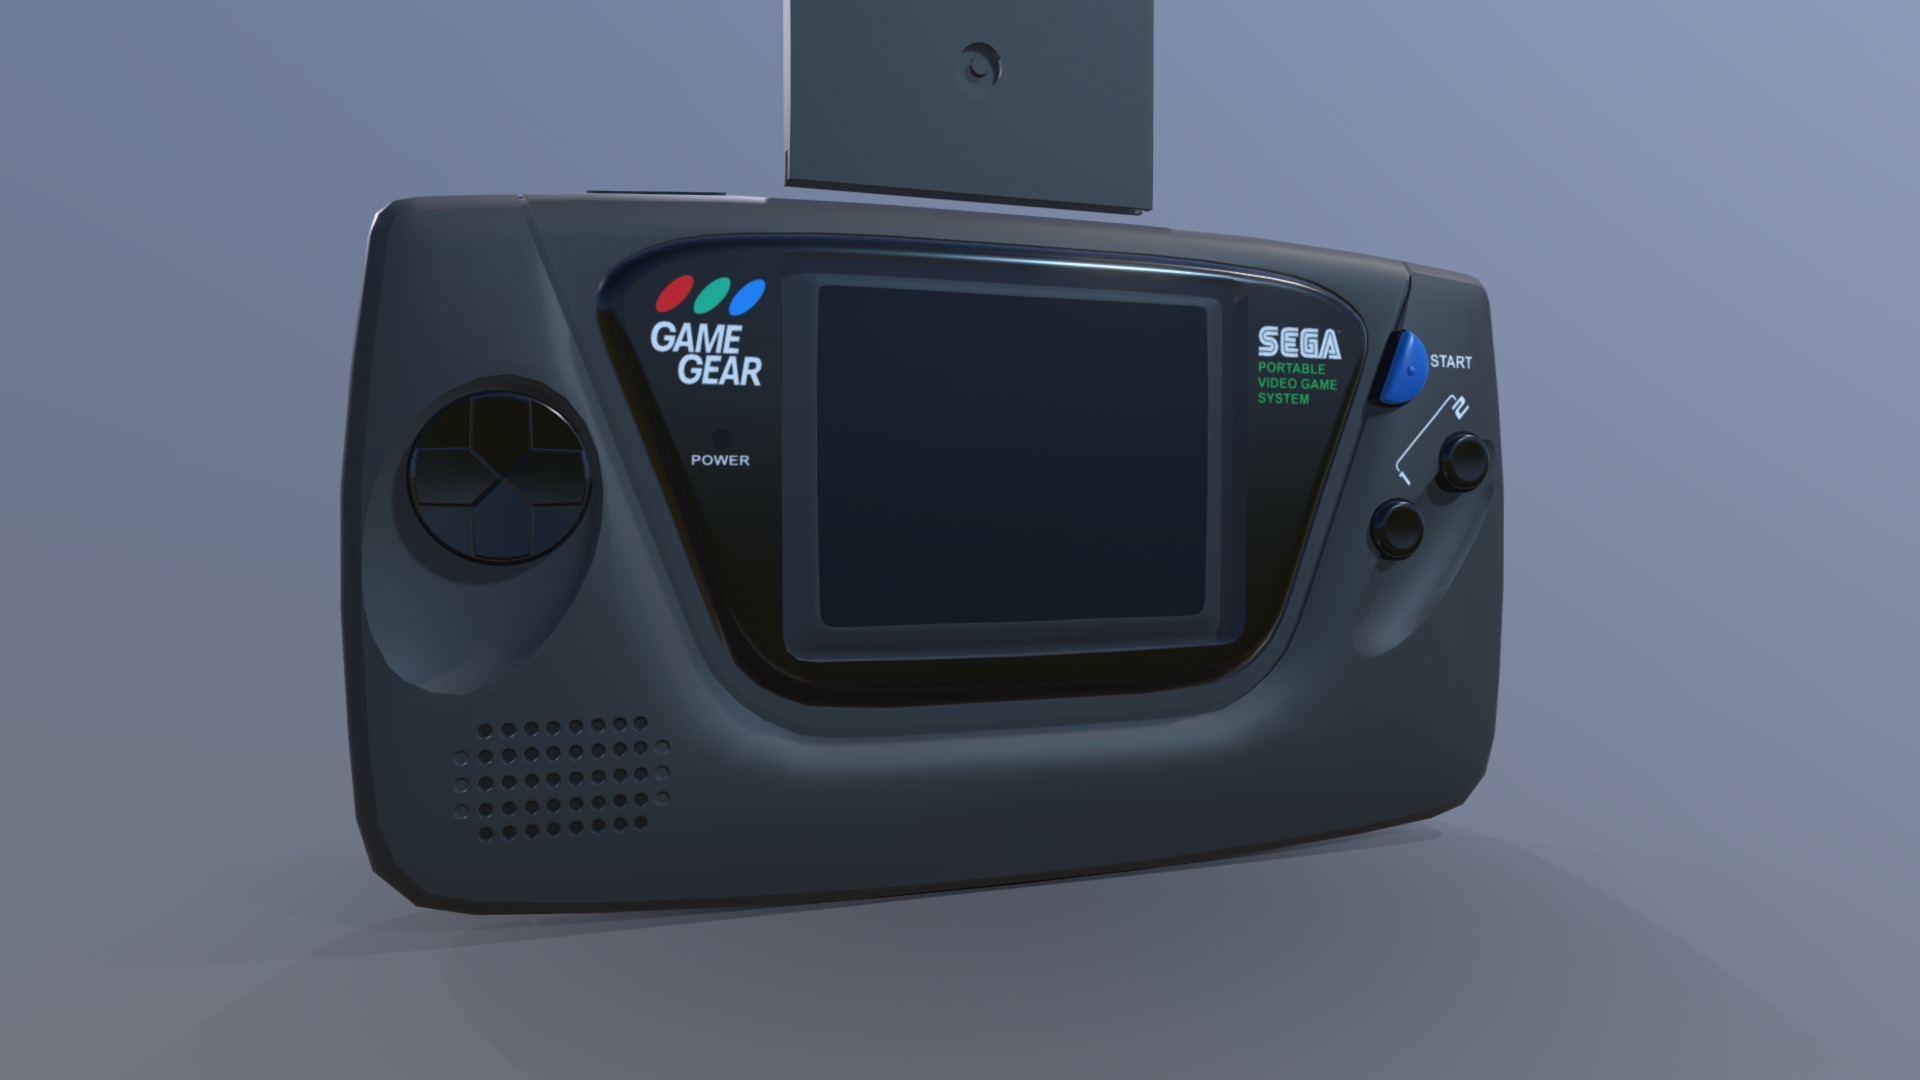 3D model Sega Game Gear - This is a 3D model of the Sega Game Gear. The 3D model is about a handheld gaming device.